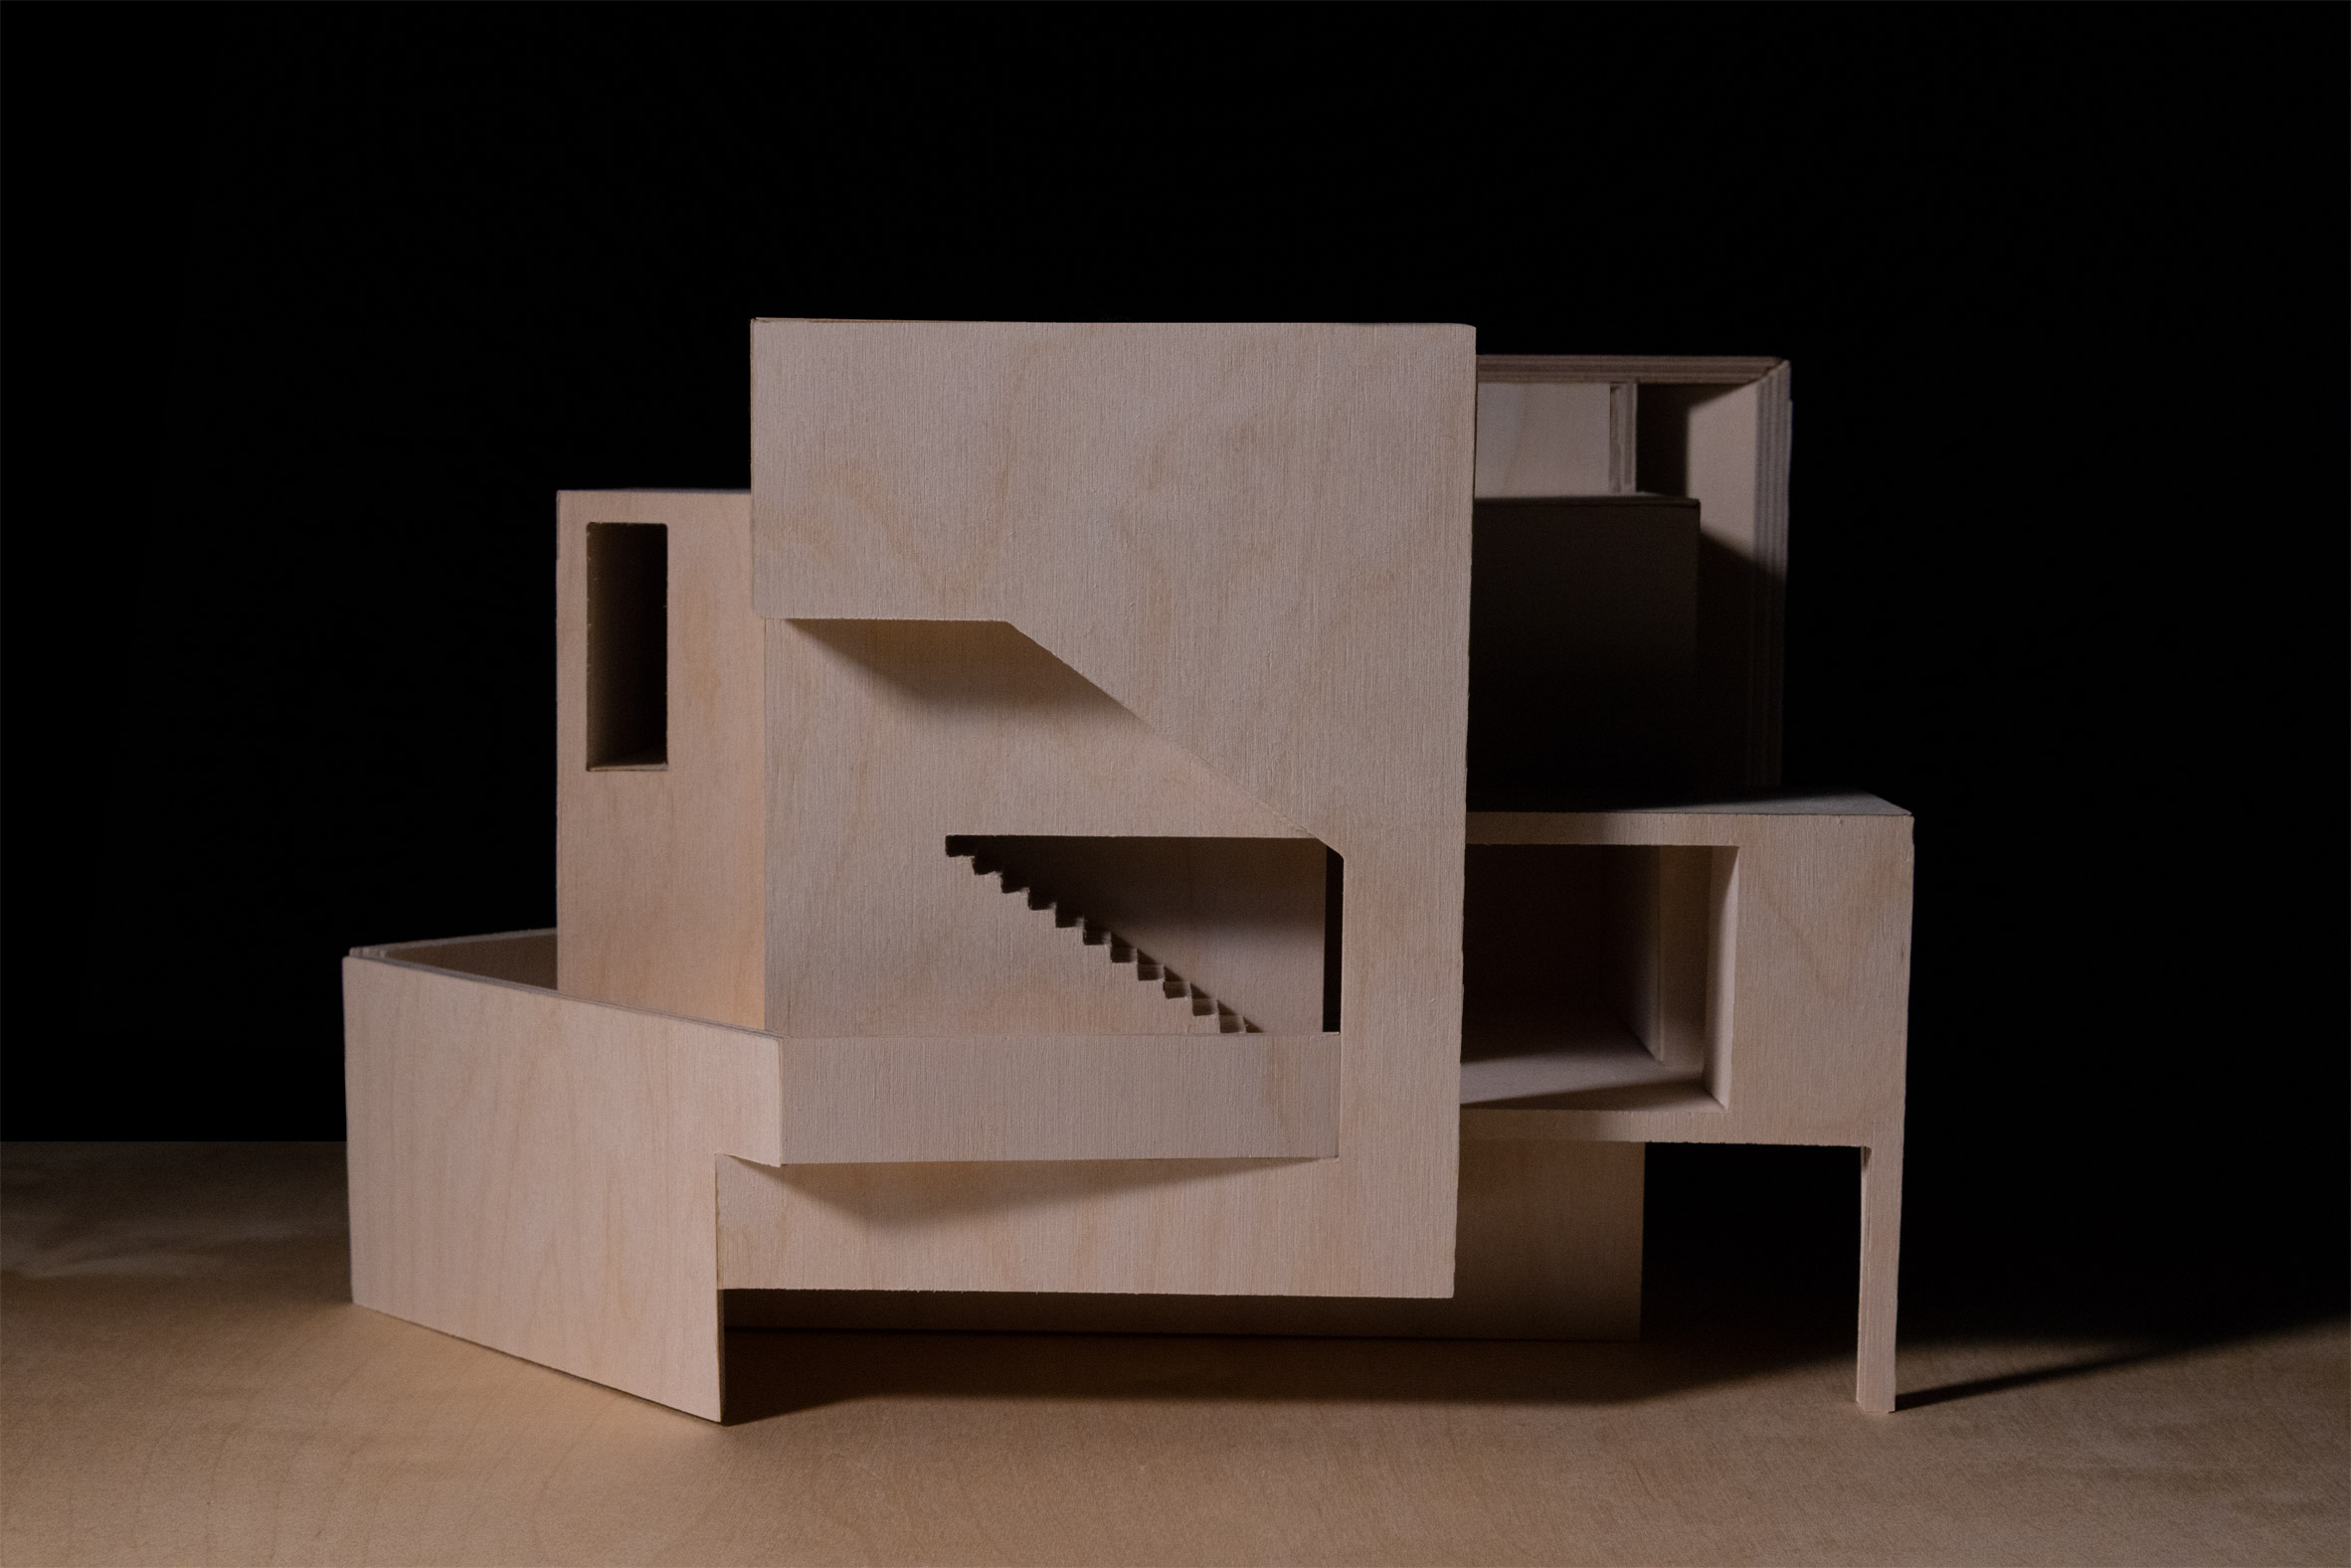 Photograph of a plywood model in front of black backdrop